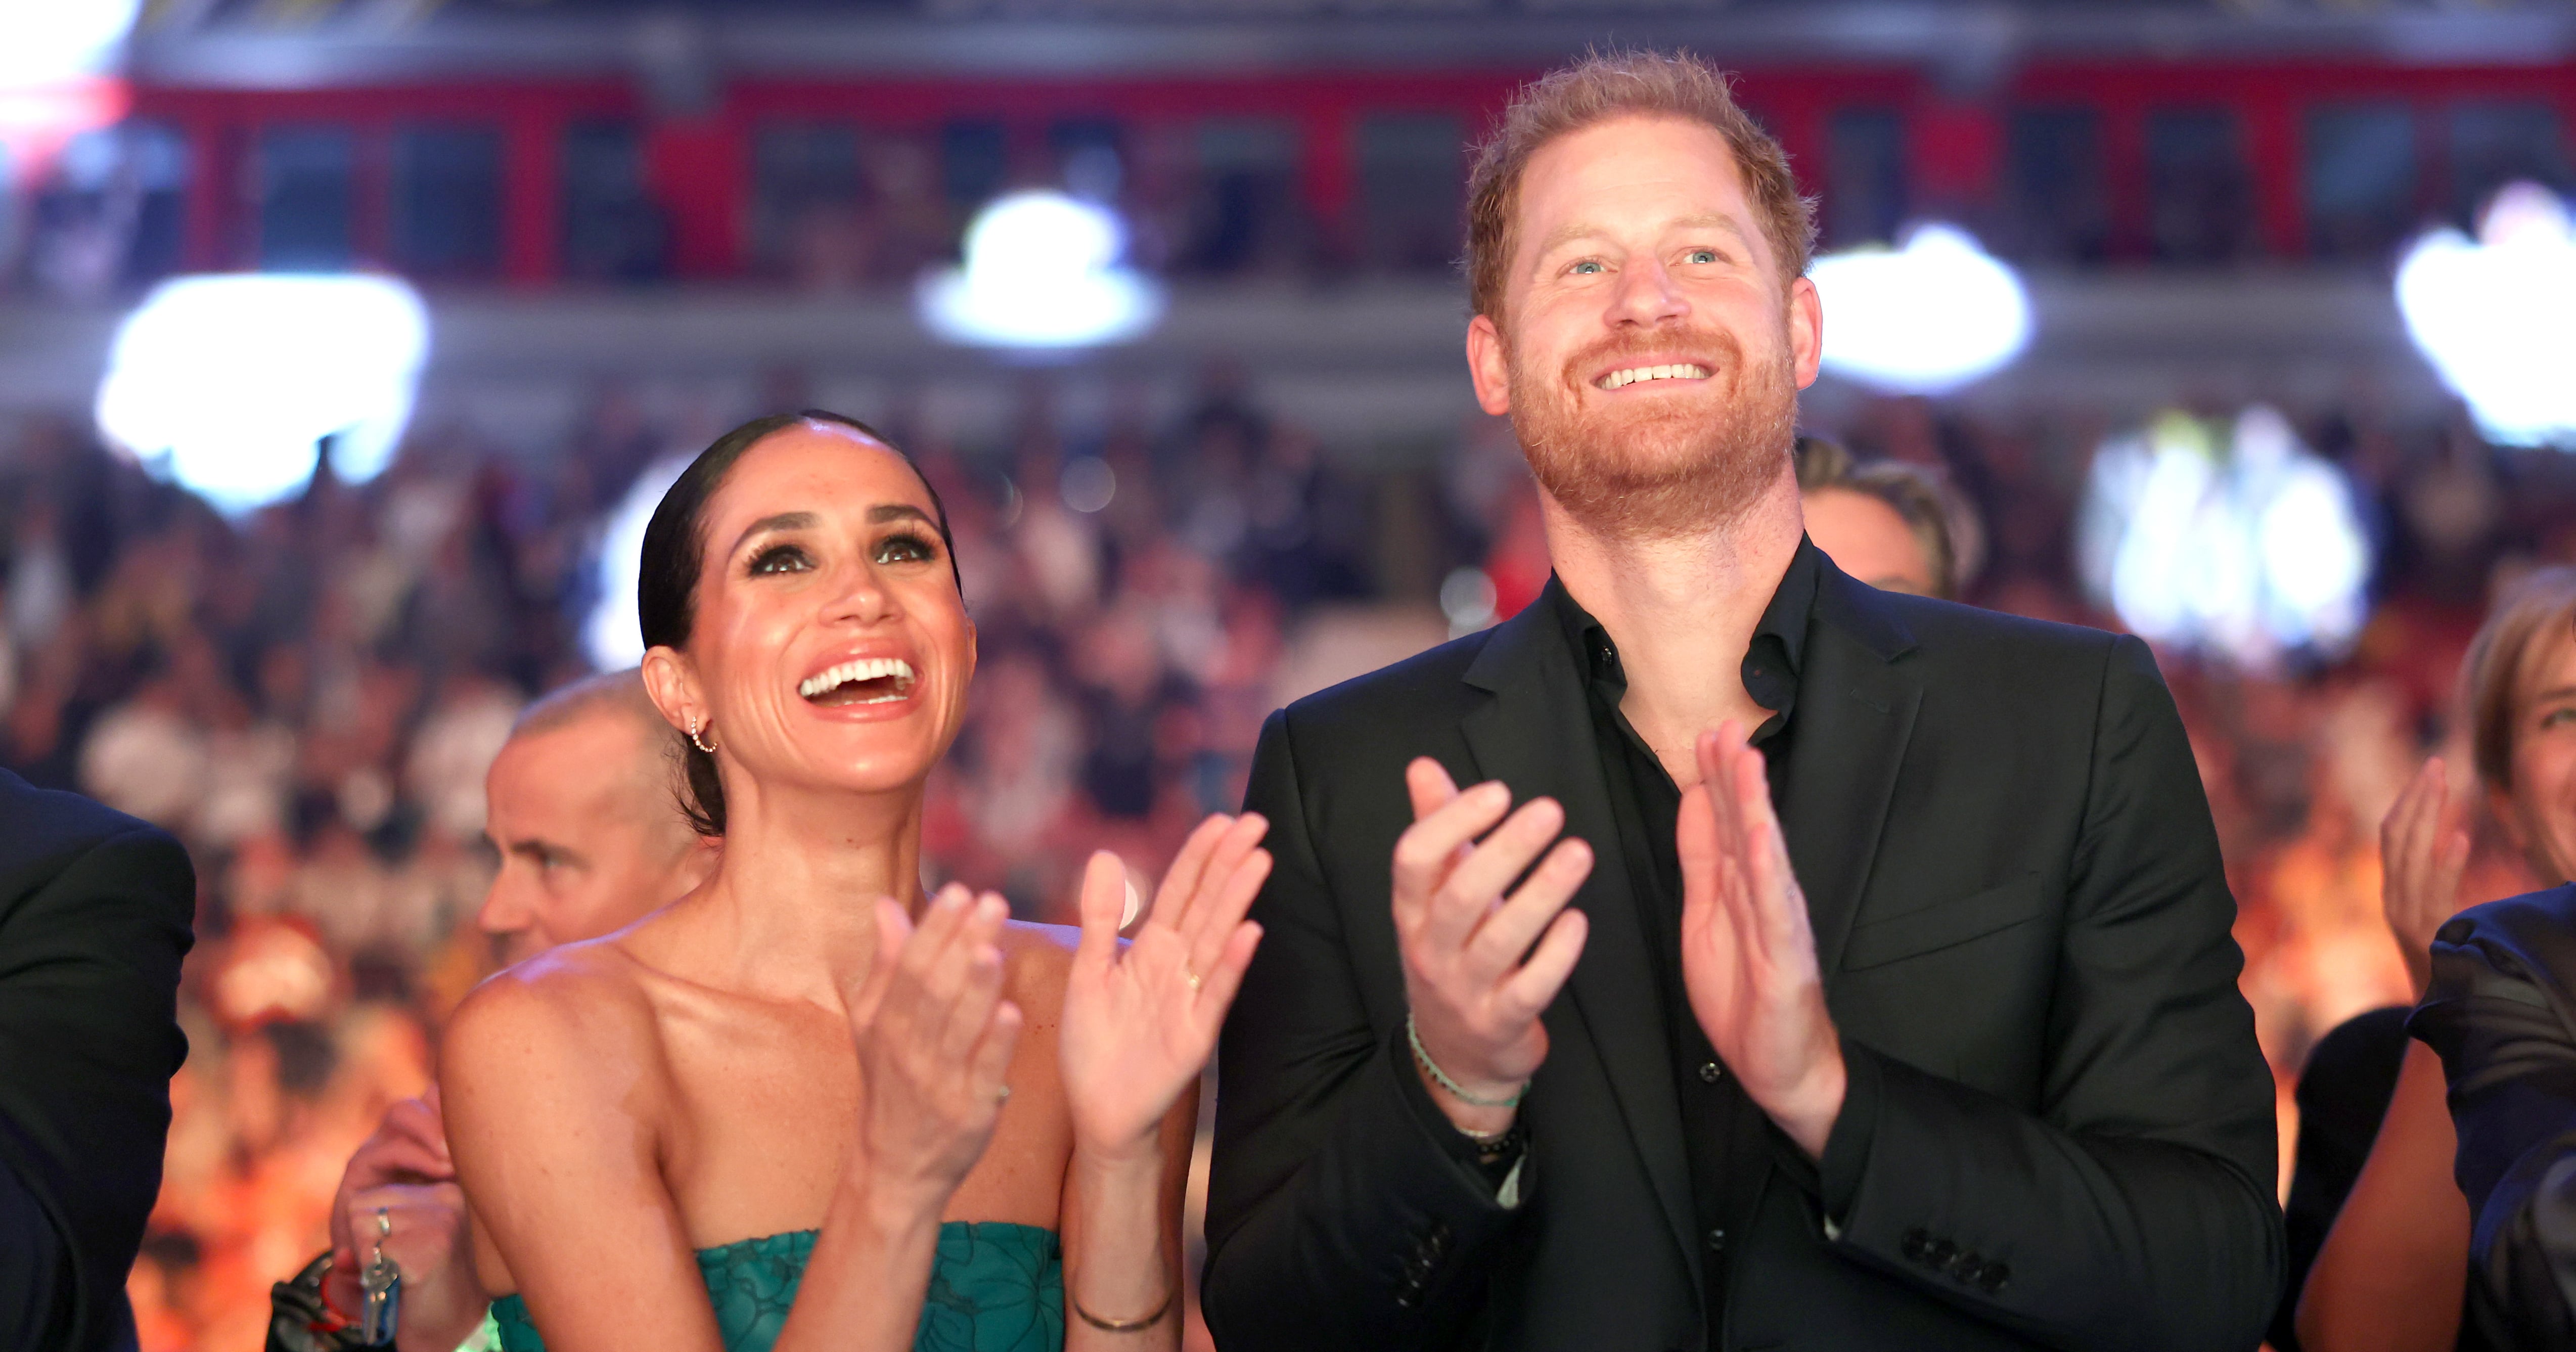 Meghan Markle’s Teal Floral Cutout Dress at Invictus Games